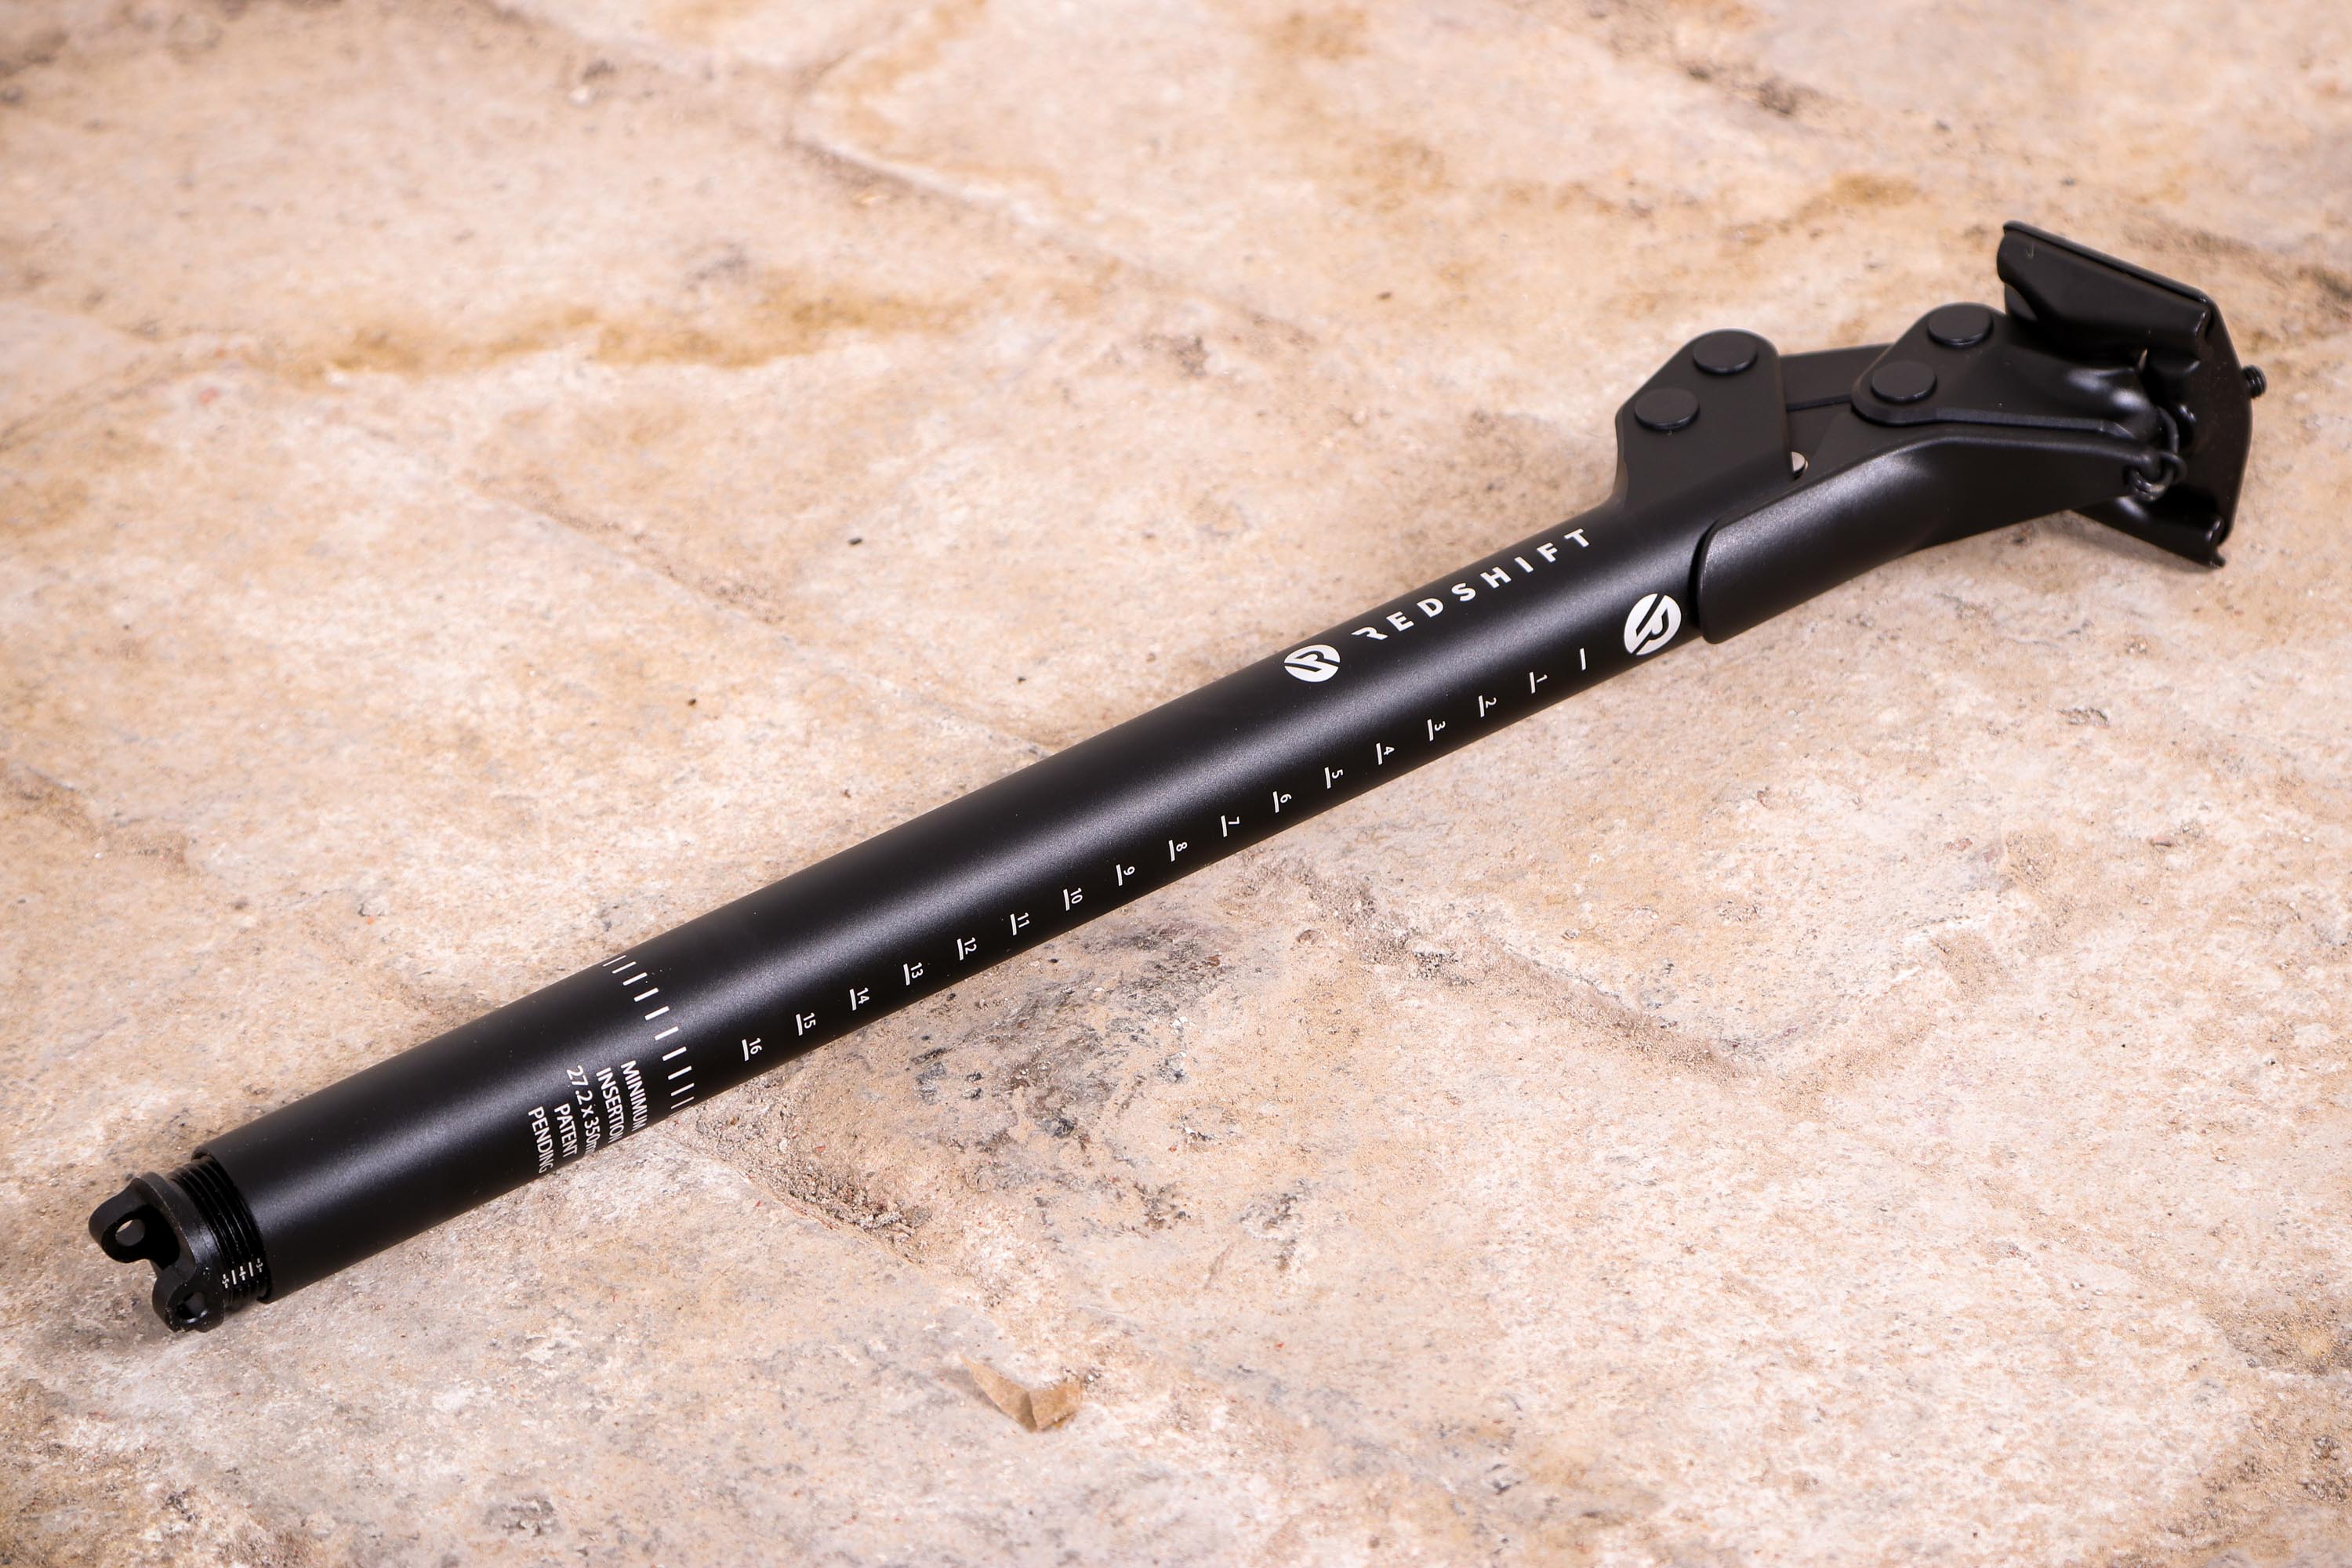 redshift shockstop seatpost review